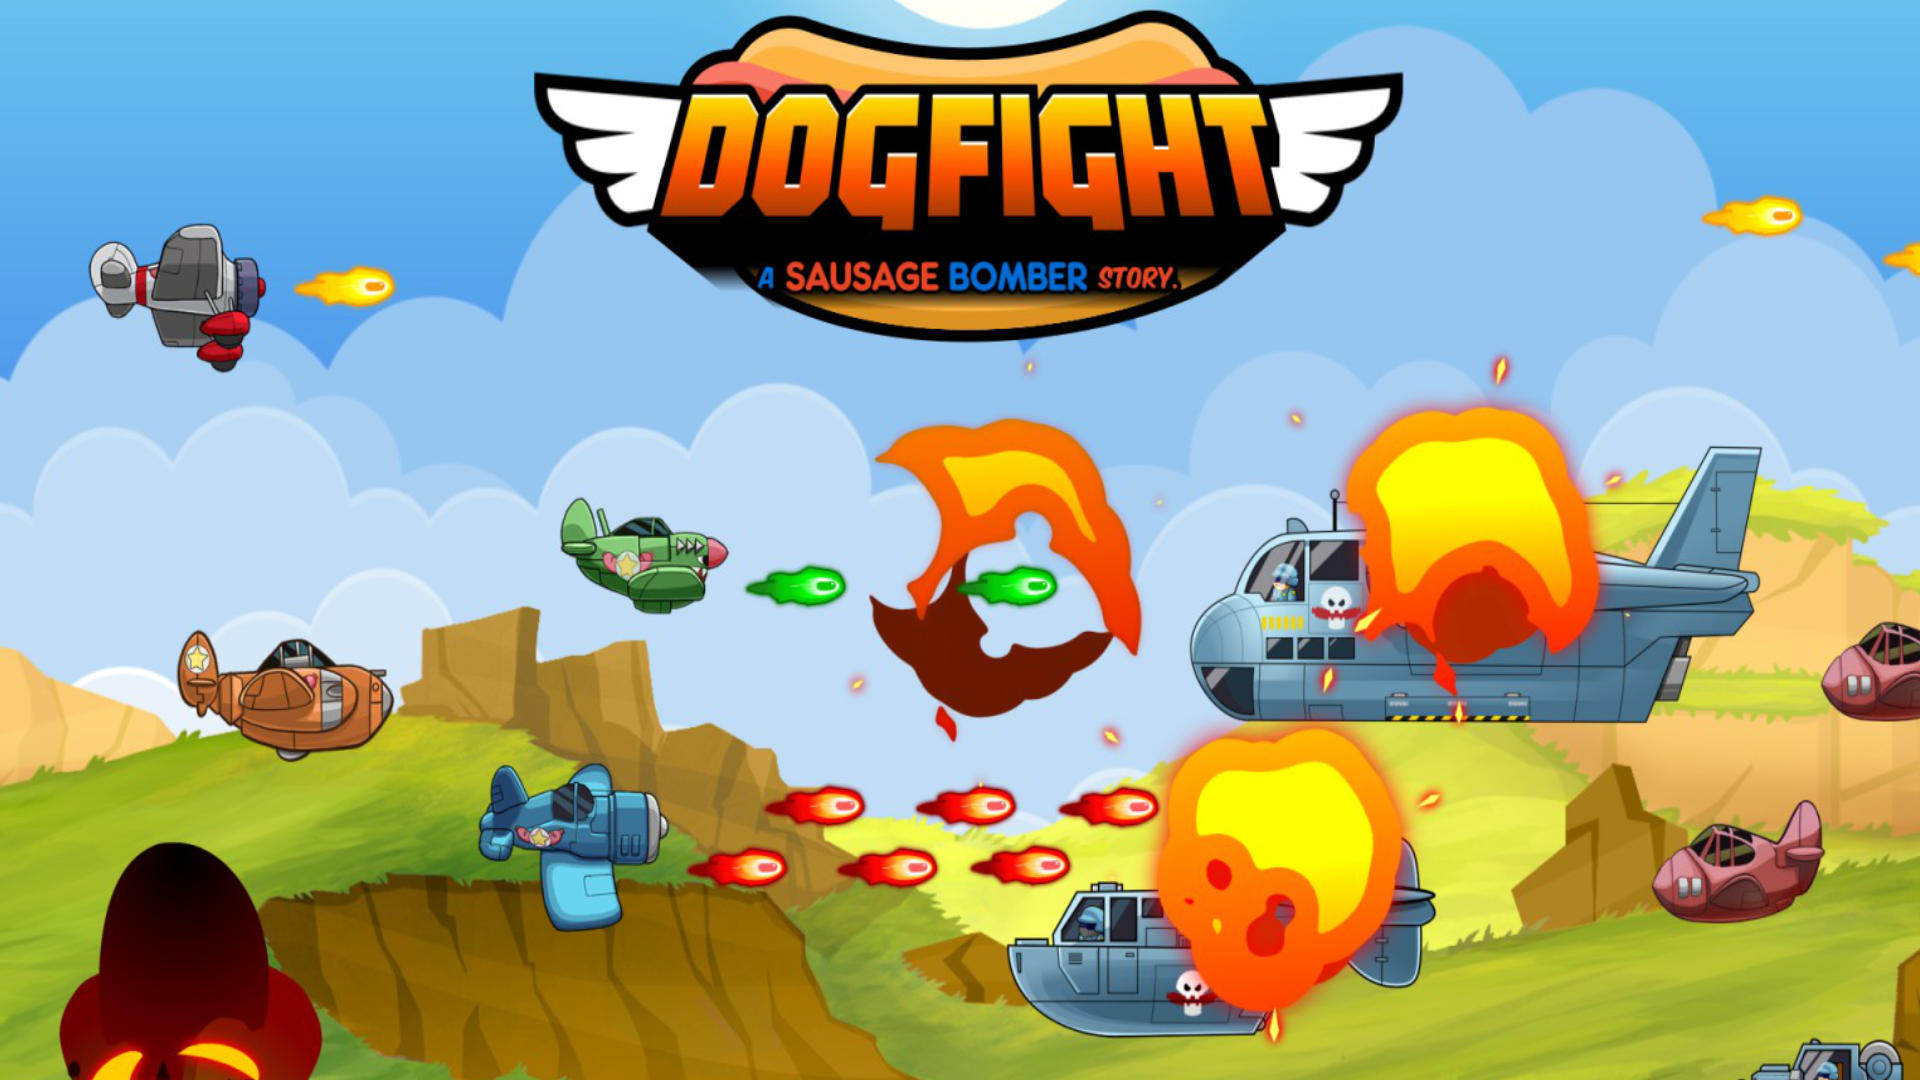 Dogfight A Sausage Bomber Story: Lustige Story trifft auf klassisches Shoot-’em-up